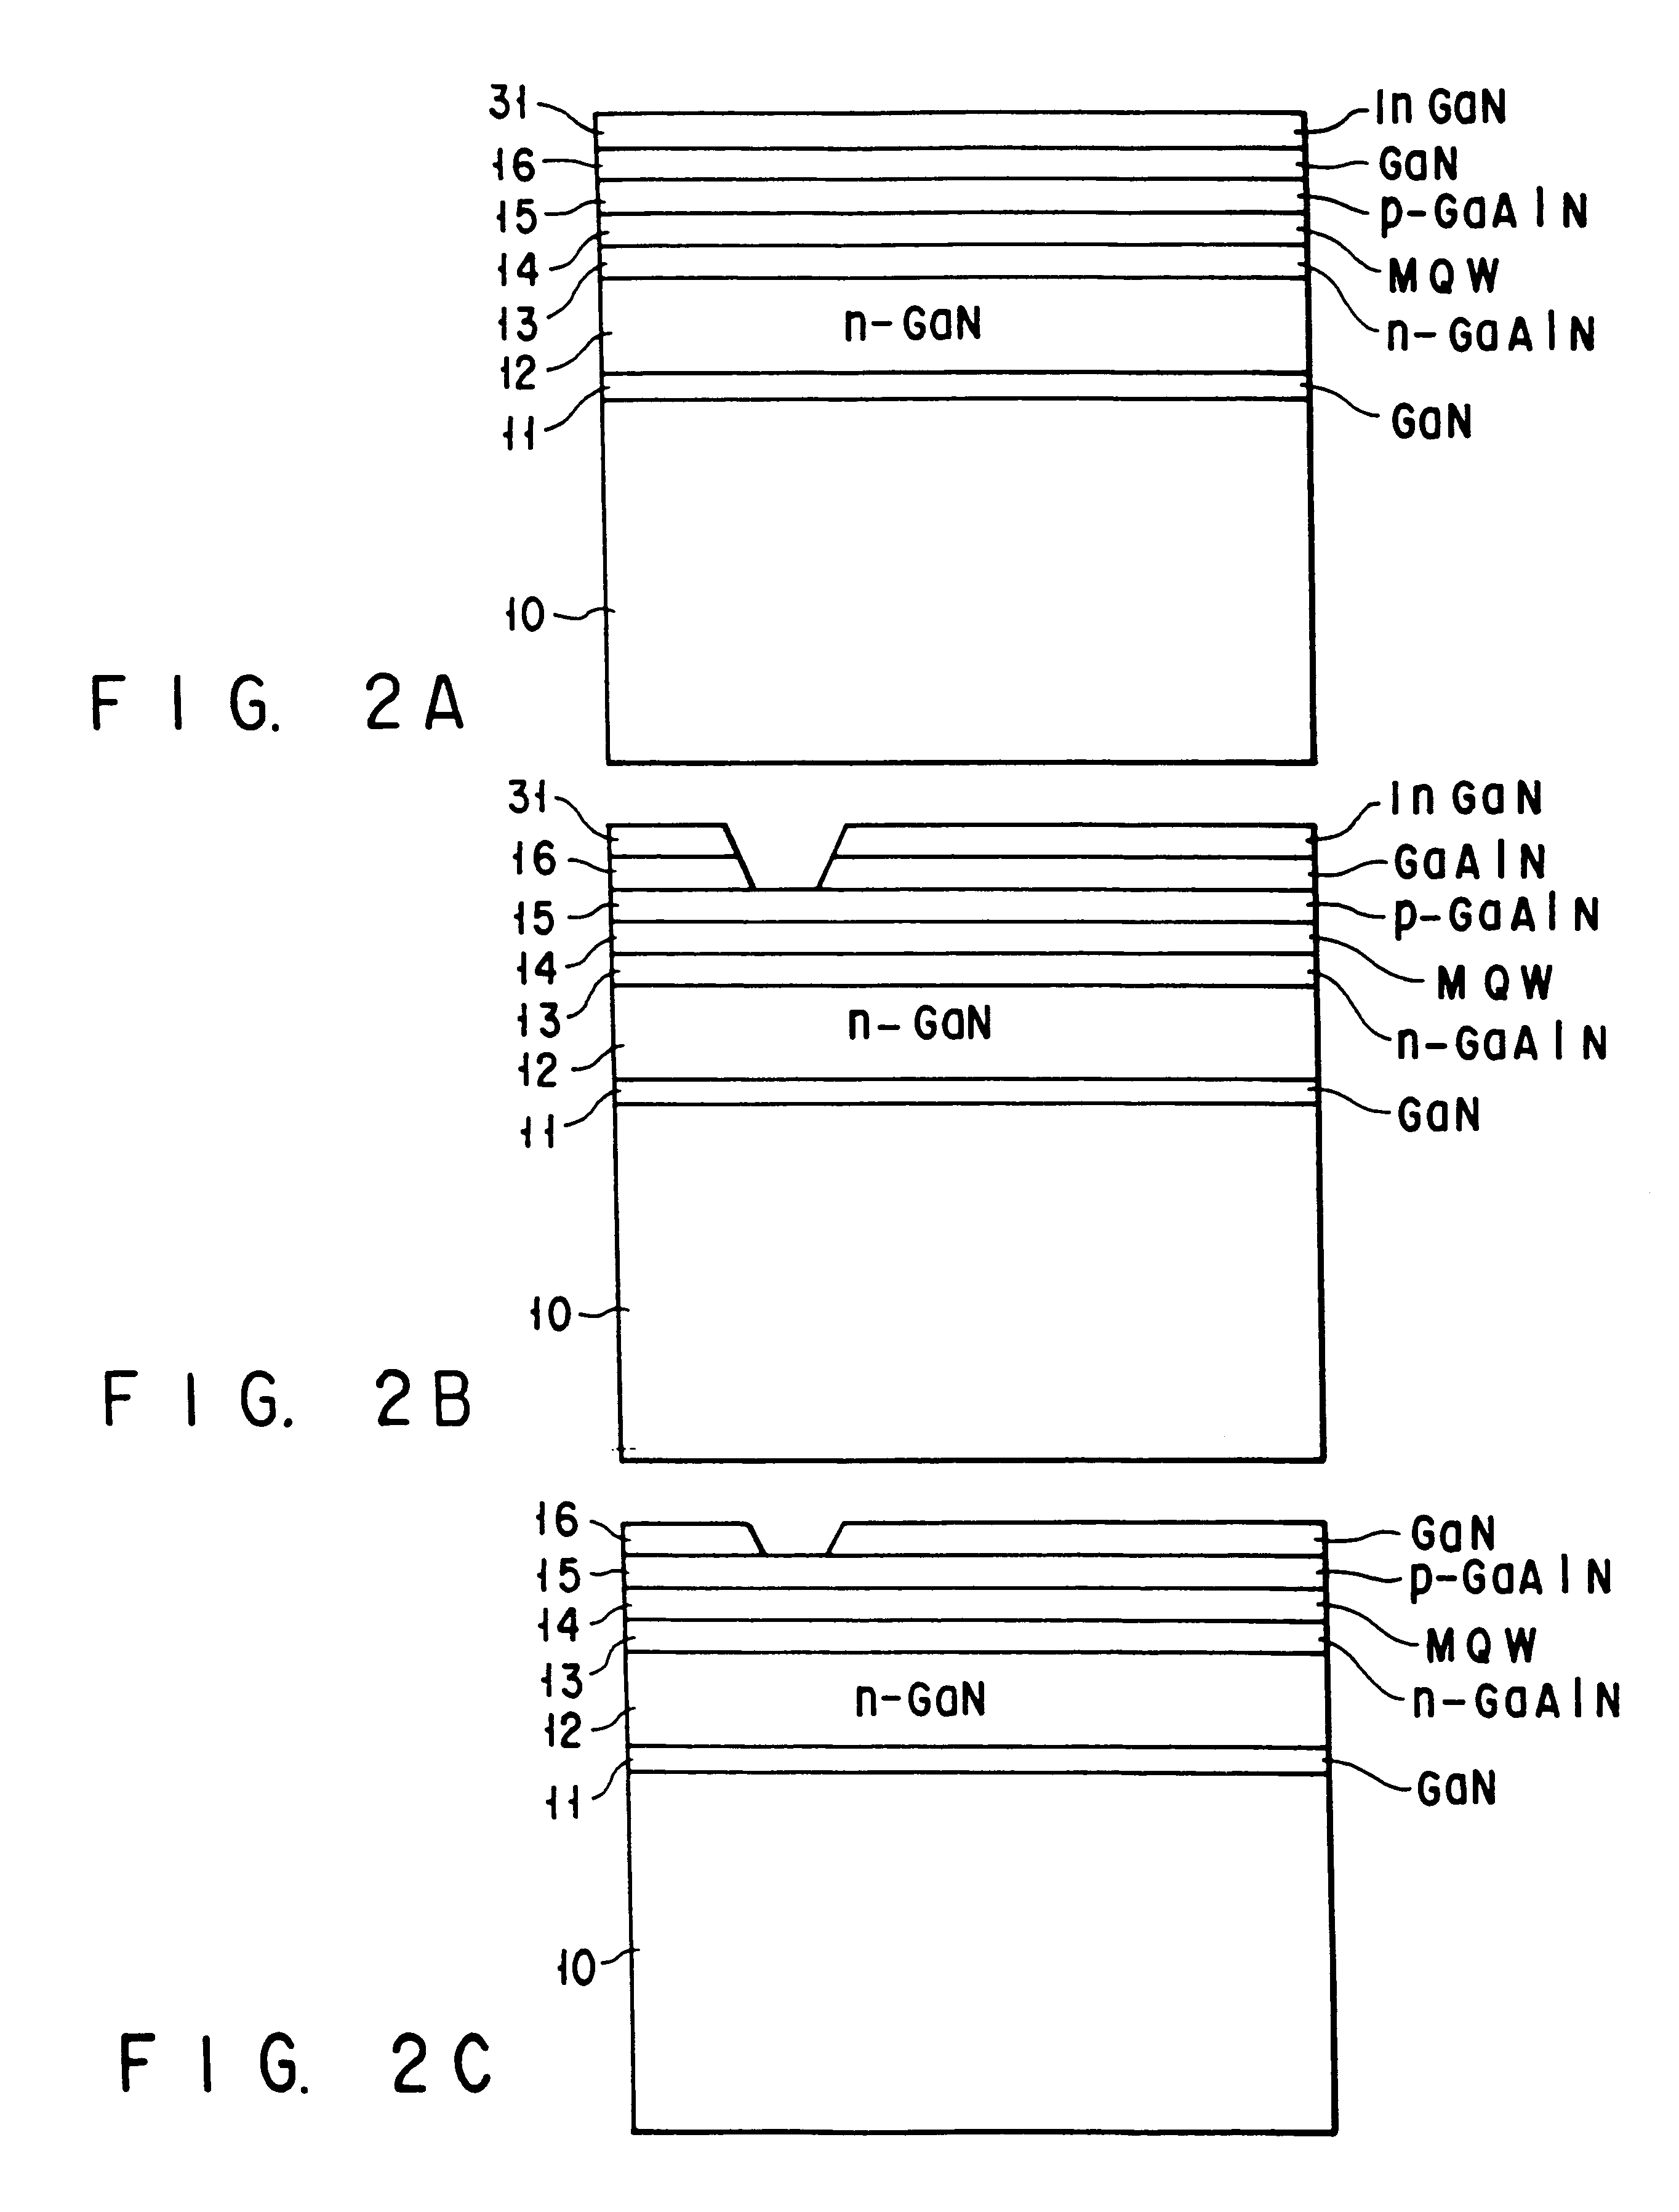 Gallium nitride-based compound semiconductor laser and method of manufacturing the same